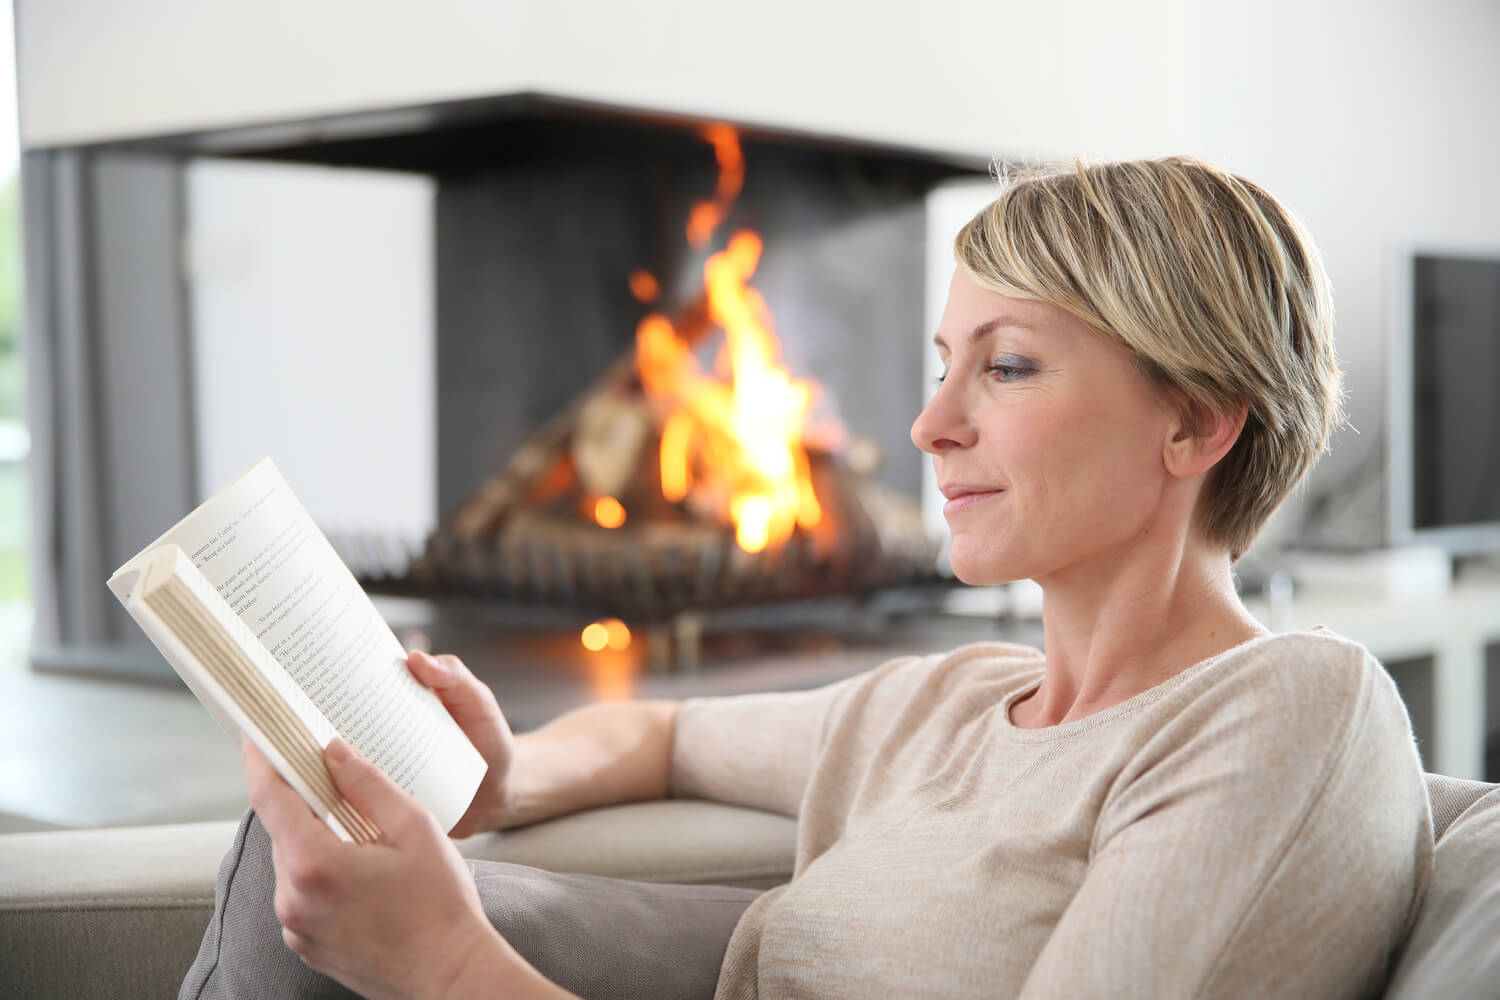 A middle aged blond woman with short hair reading a book next to a fireplace, with no visible signs of vascular surgery.